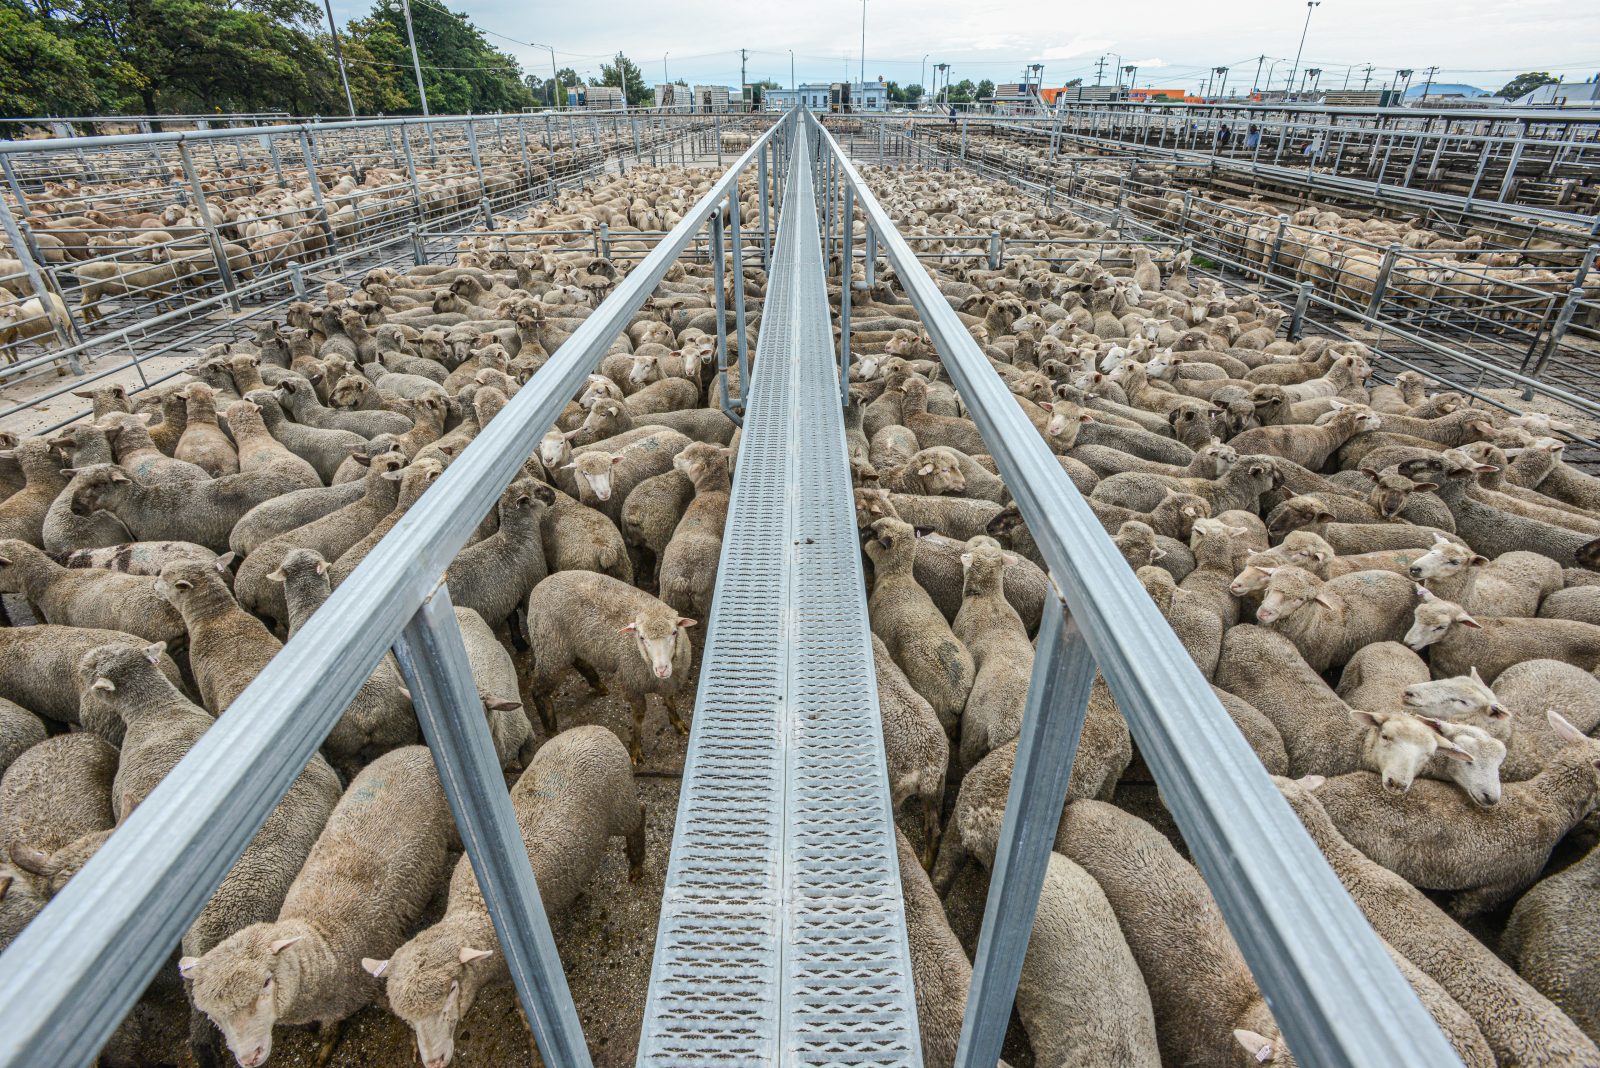 Tightly packed sheep at the sale yards. Australia, 2013